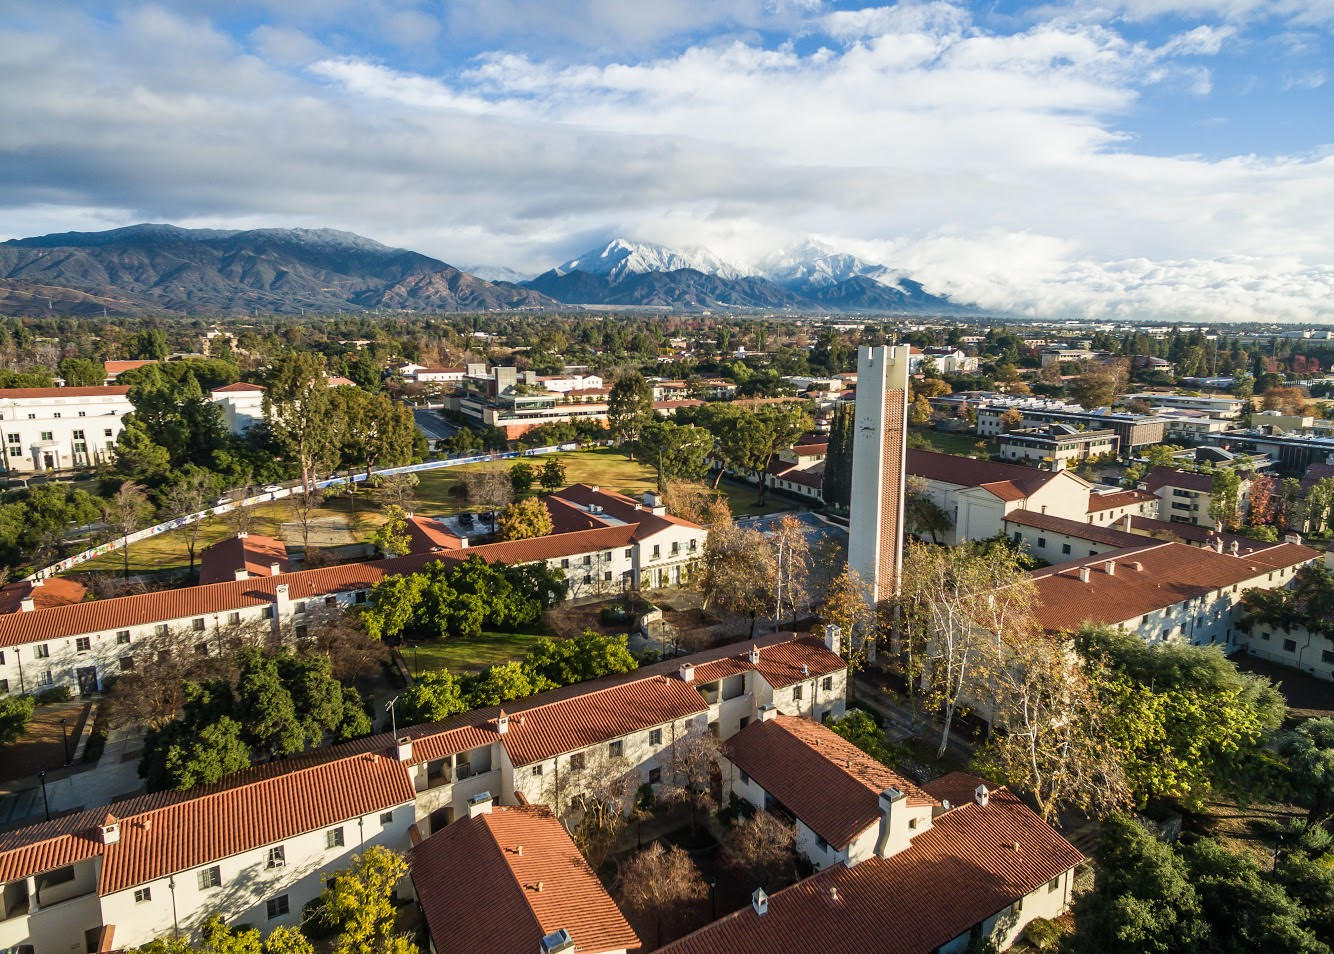 Overview of Claremont village with mountains in the background